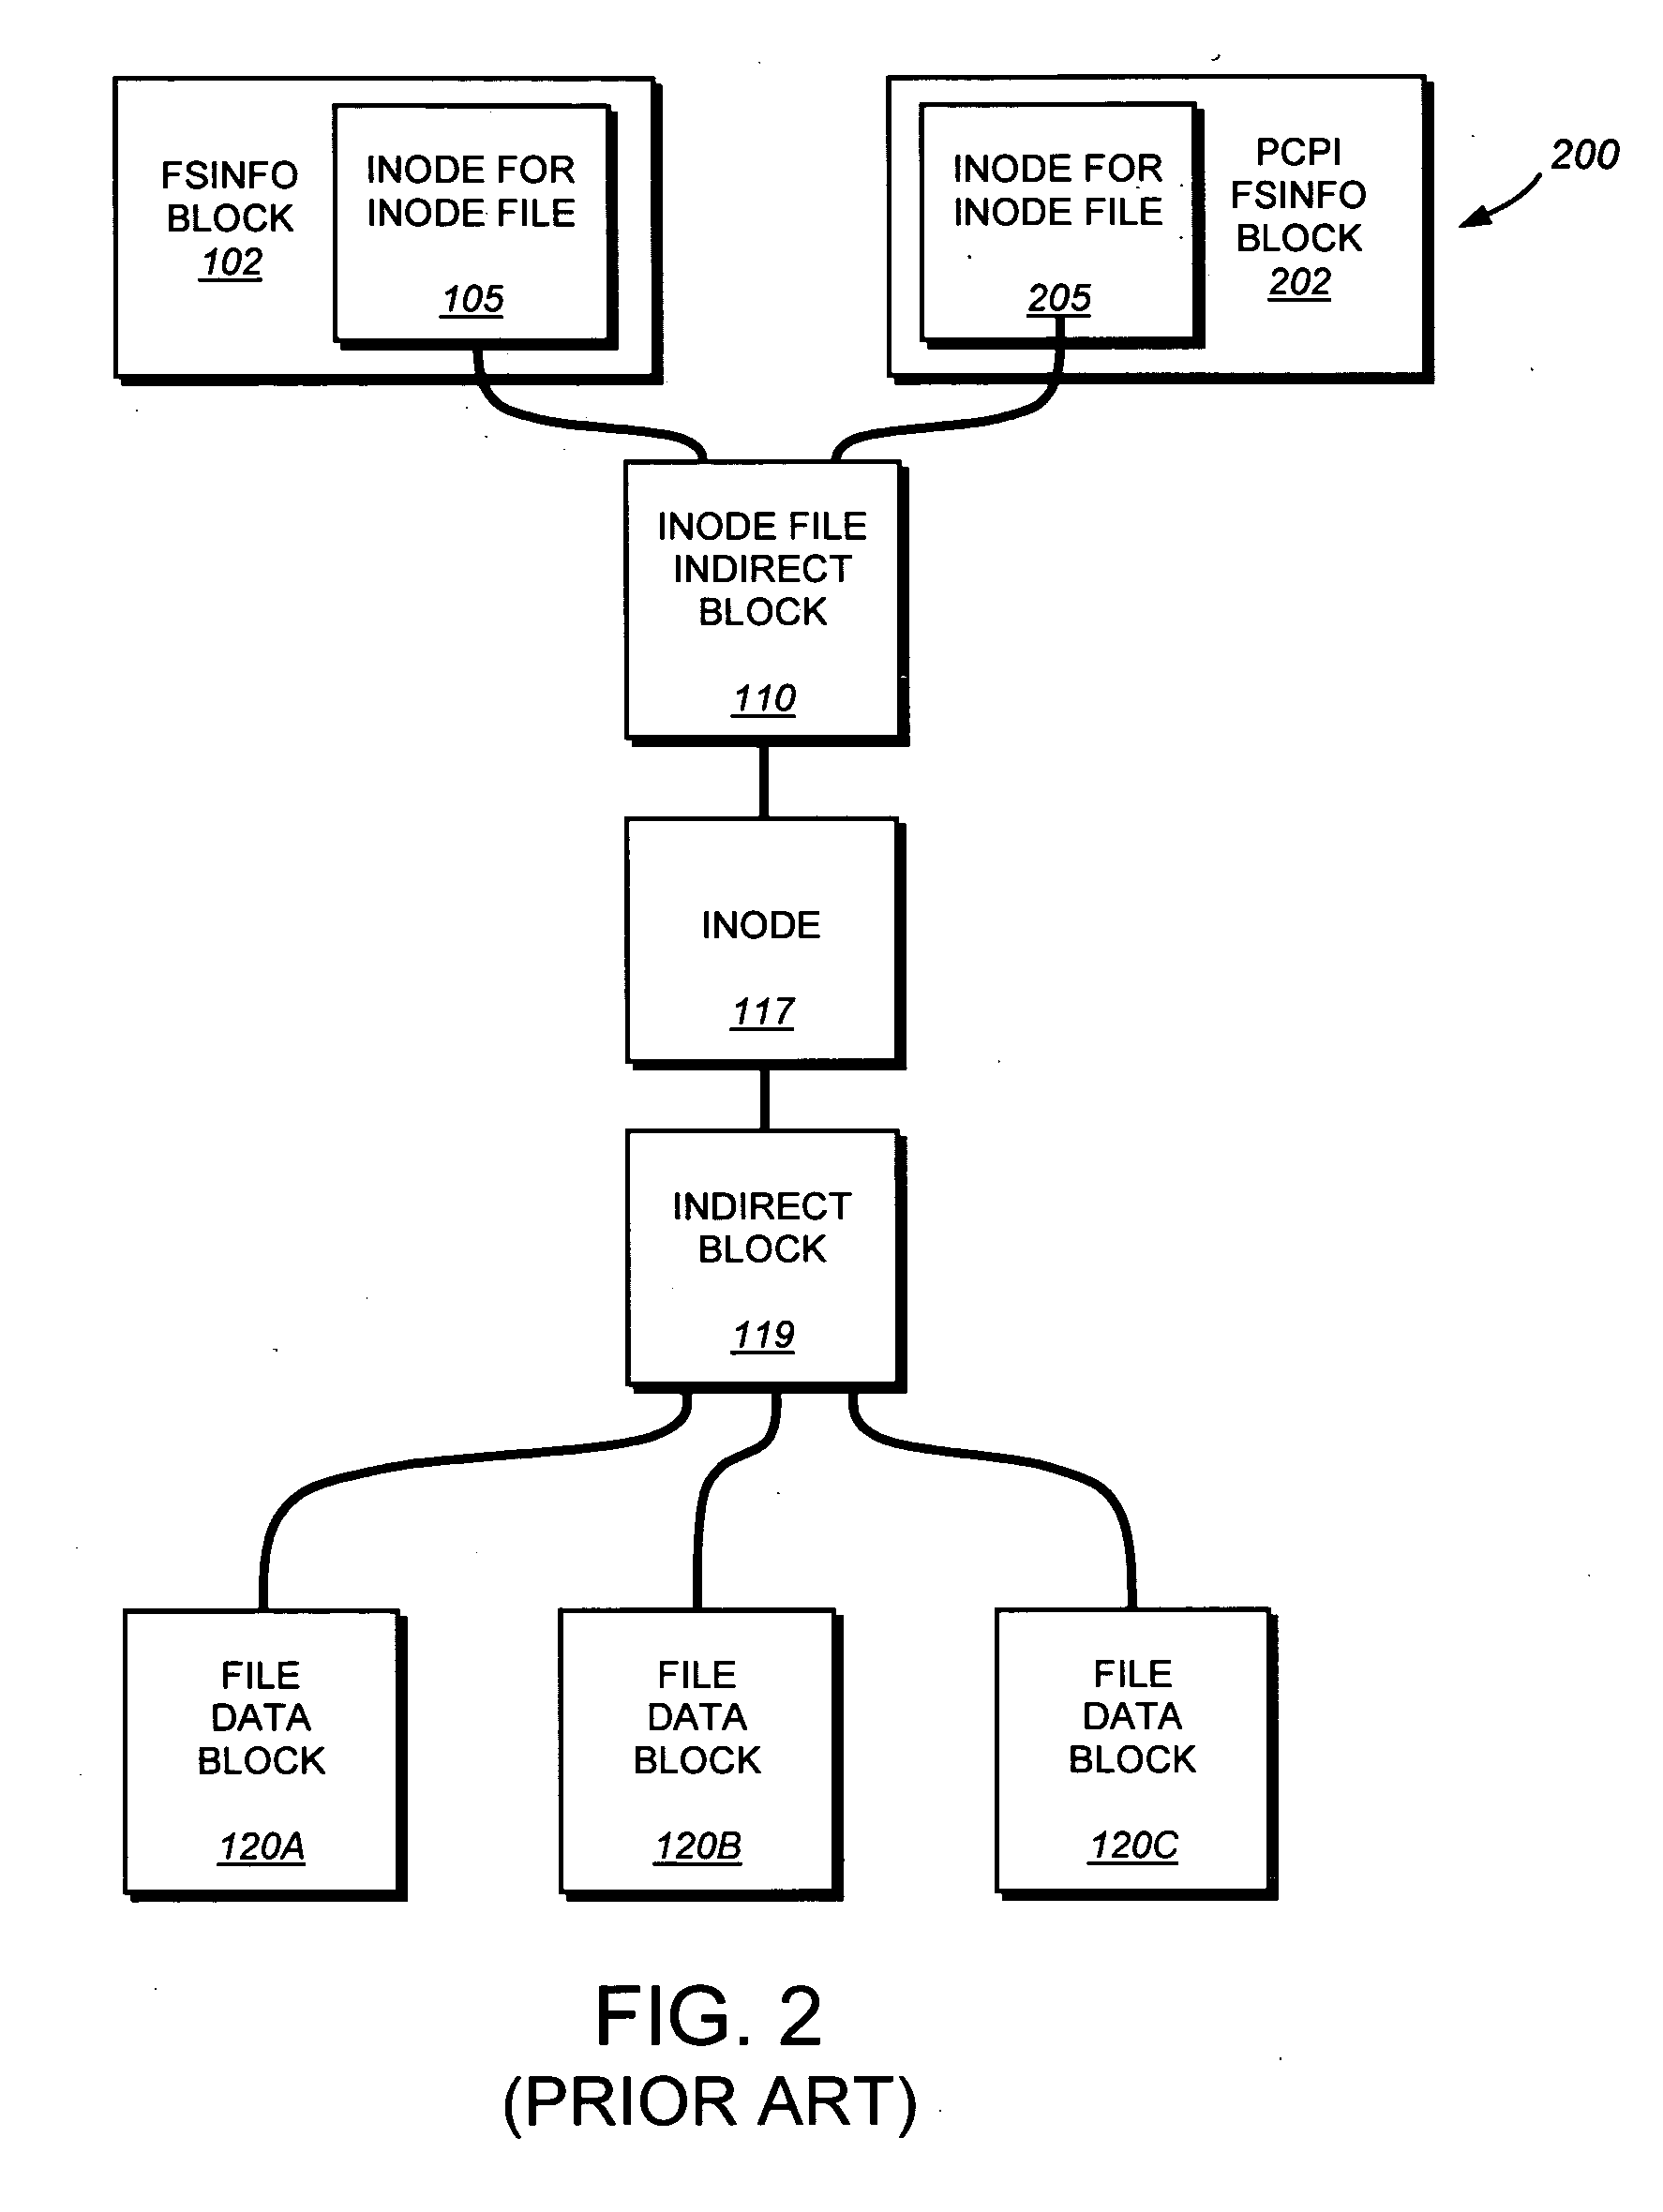 System and method for providing continuous data protection